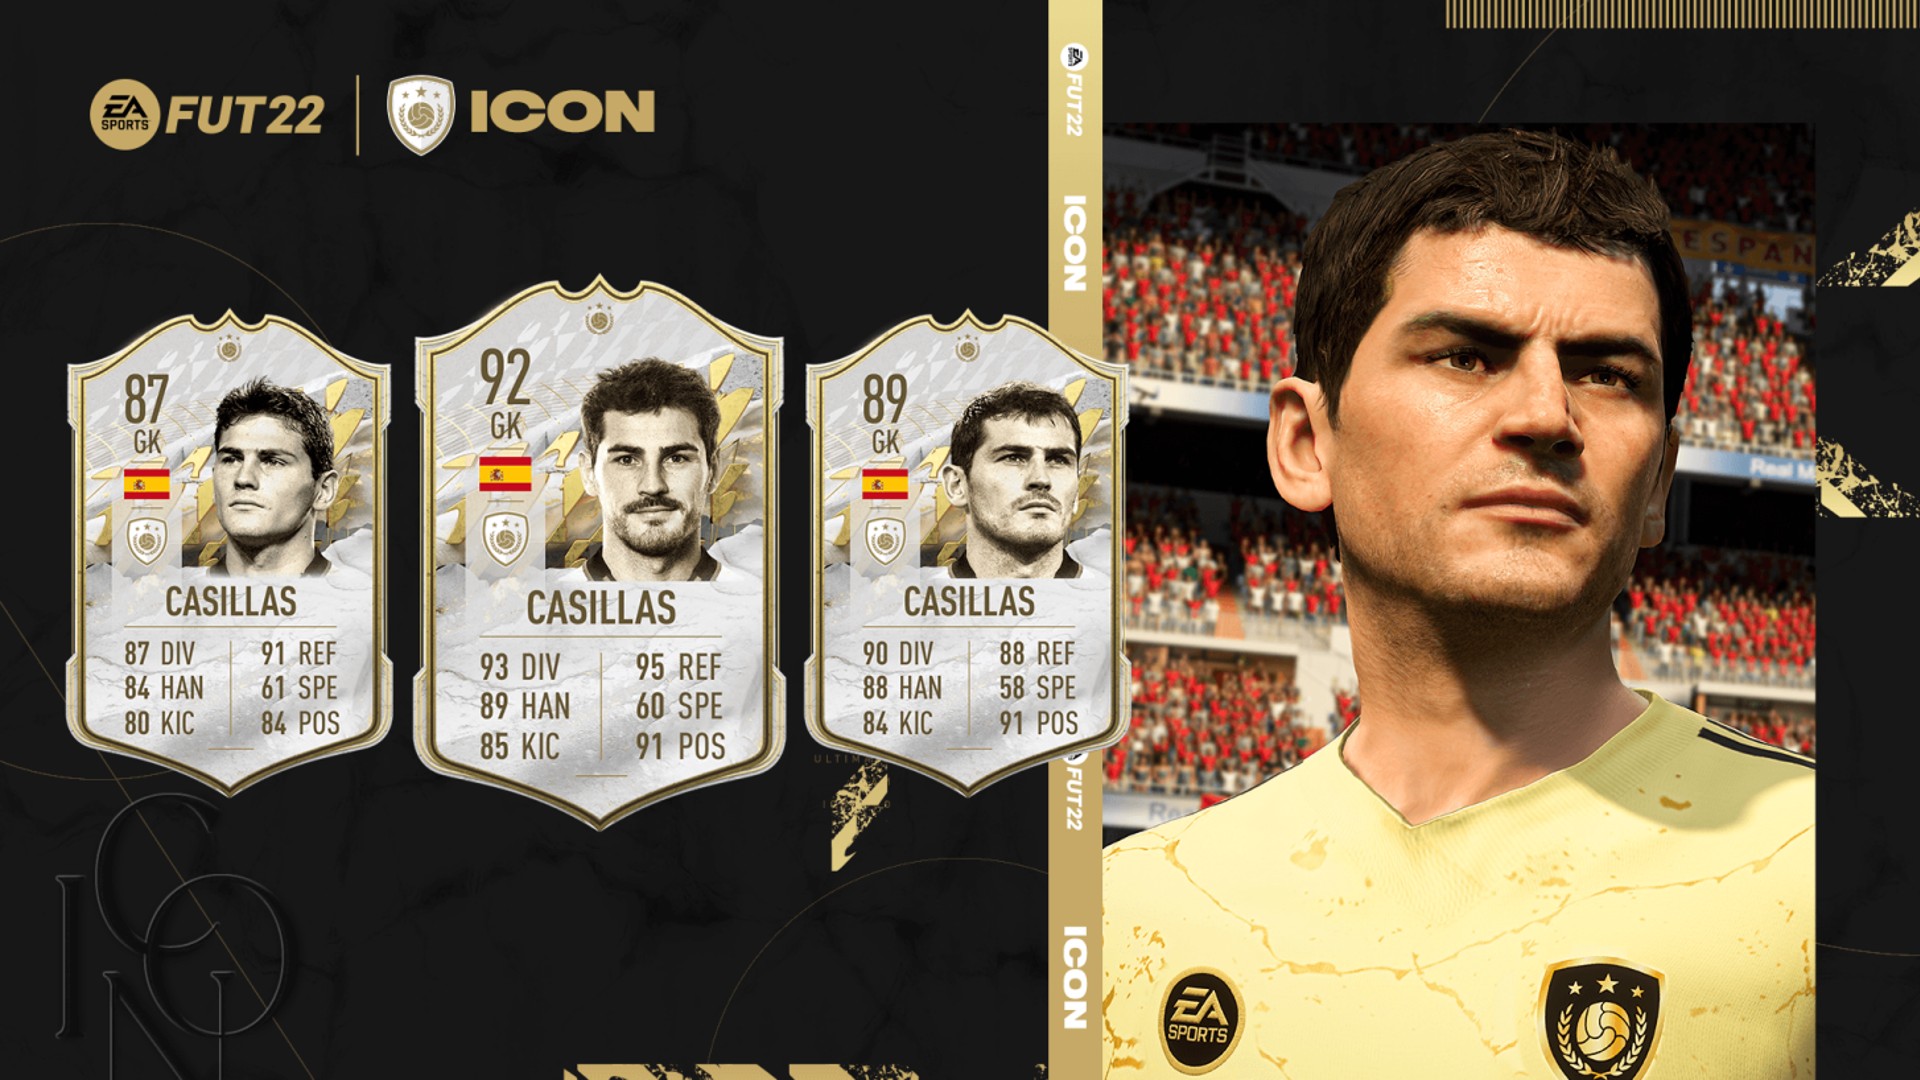 FIFA 22 new Icons: A graphic showing the three Icon cards for Casillas in FIFA 22